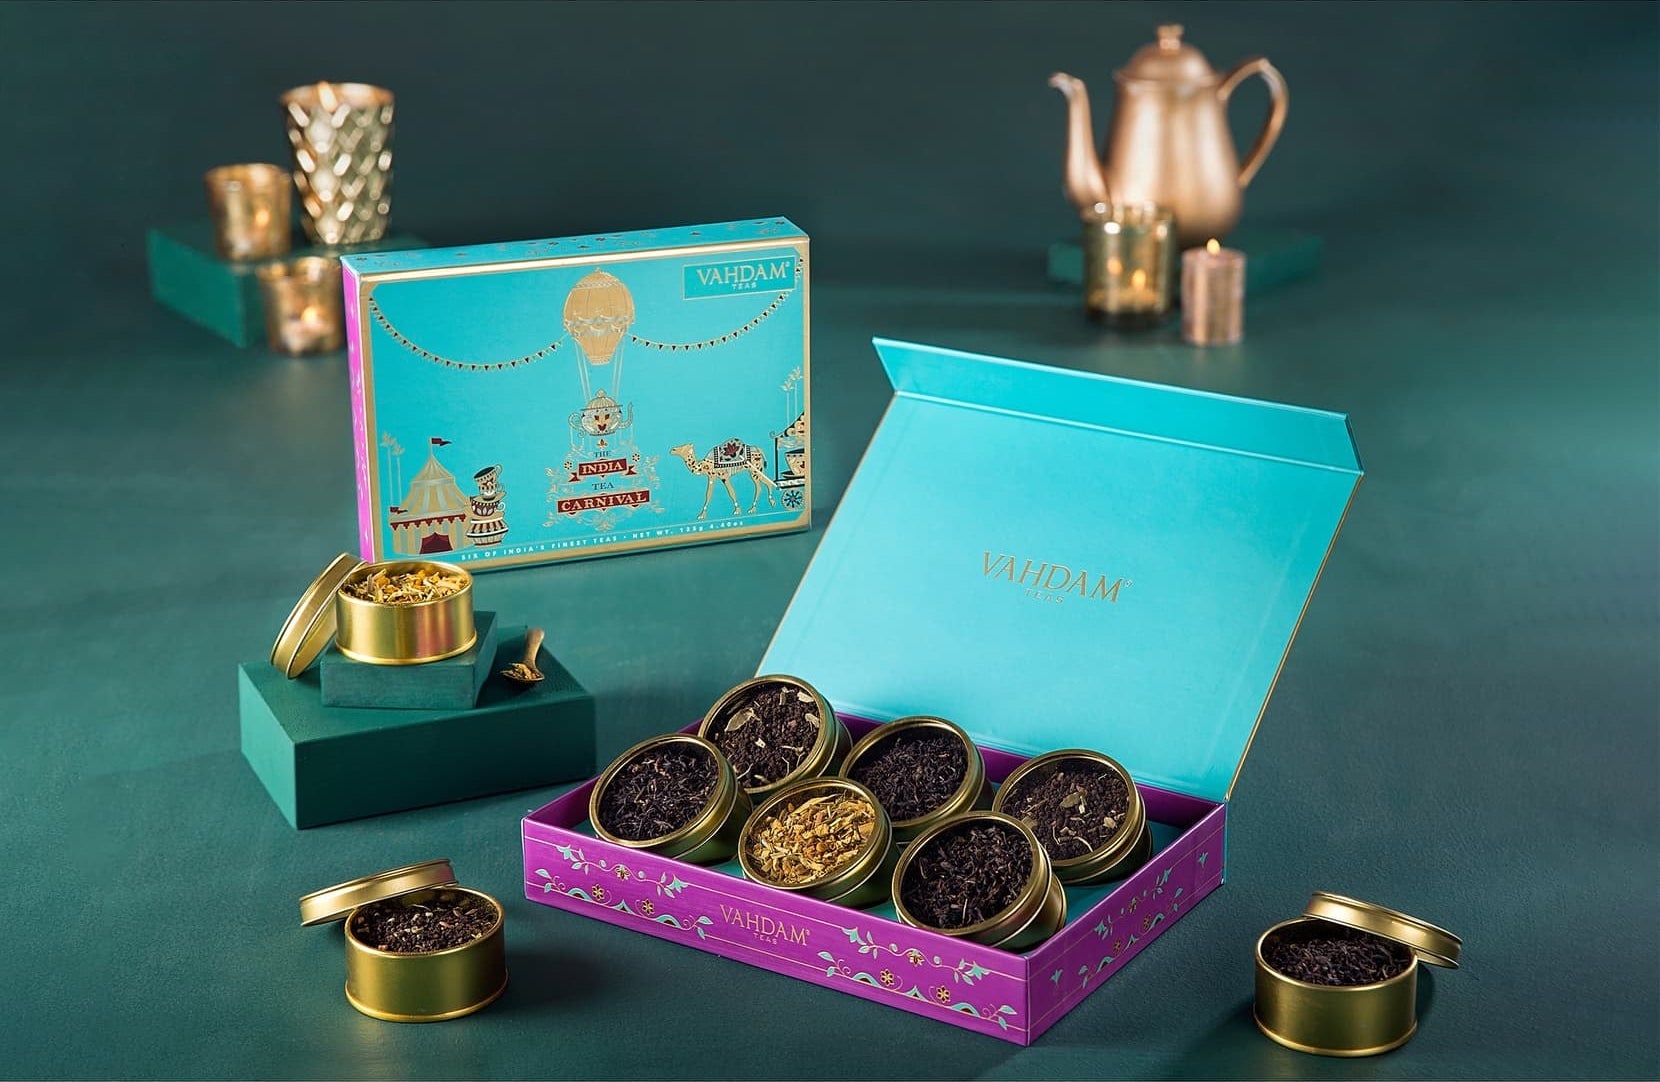 The teas packed in round tins, packaged in an ornate box